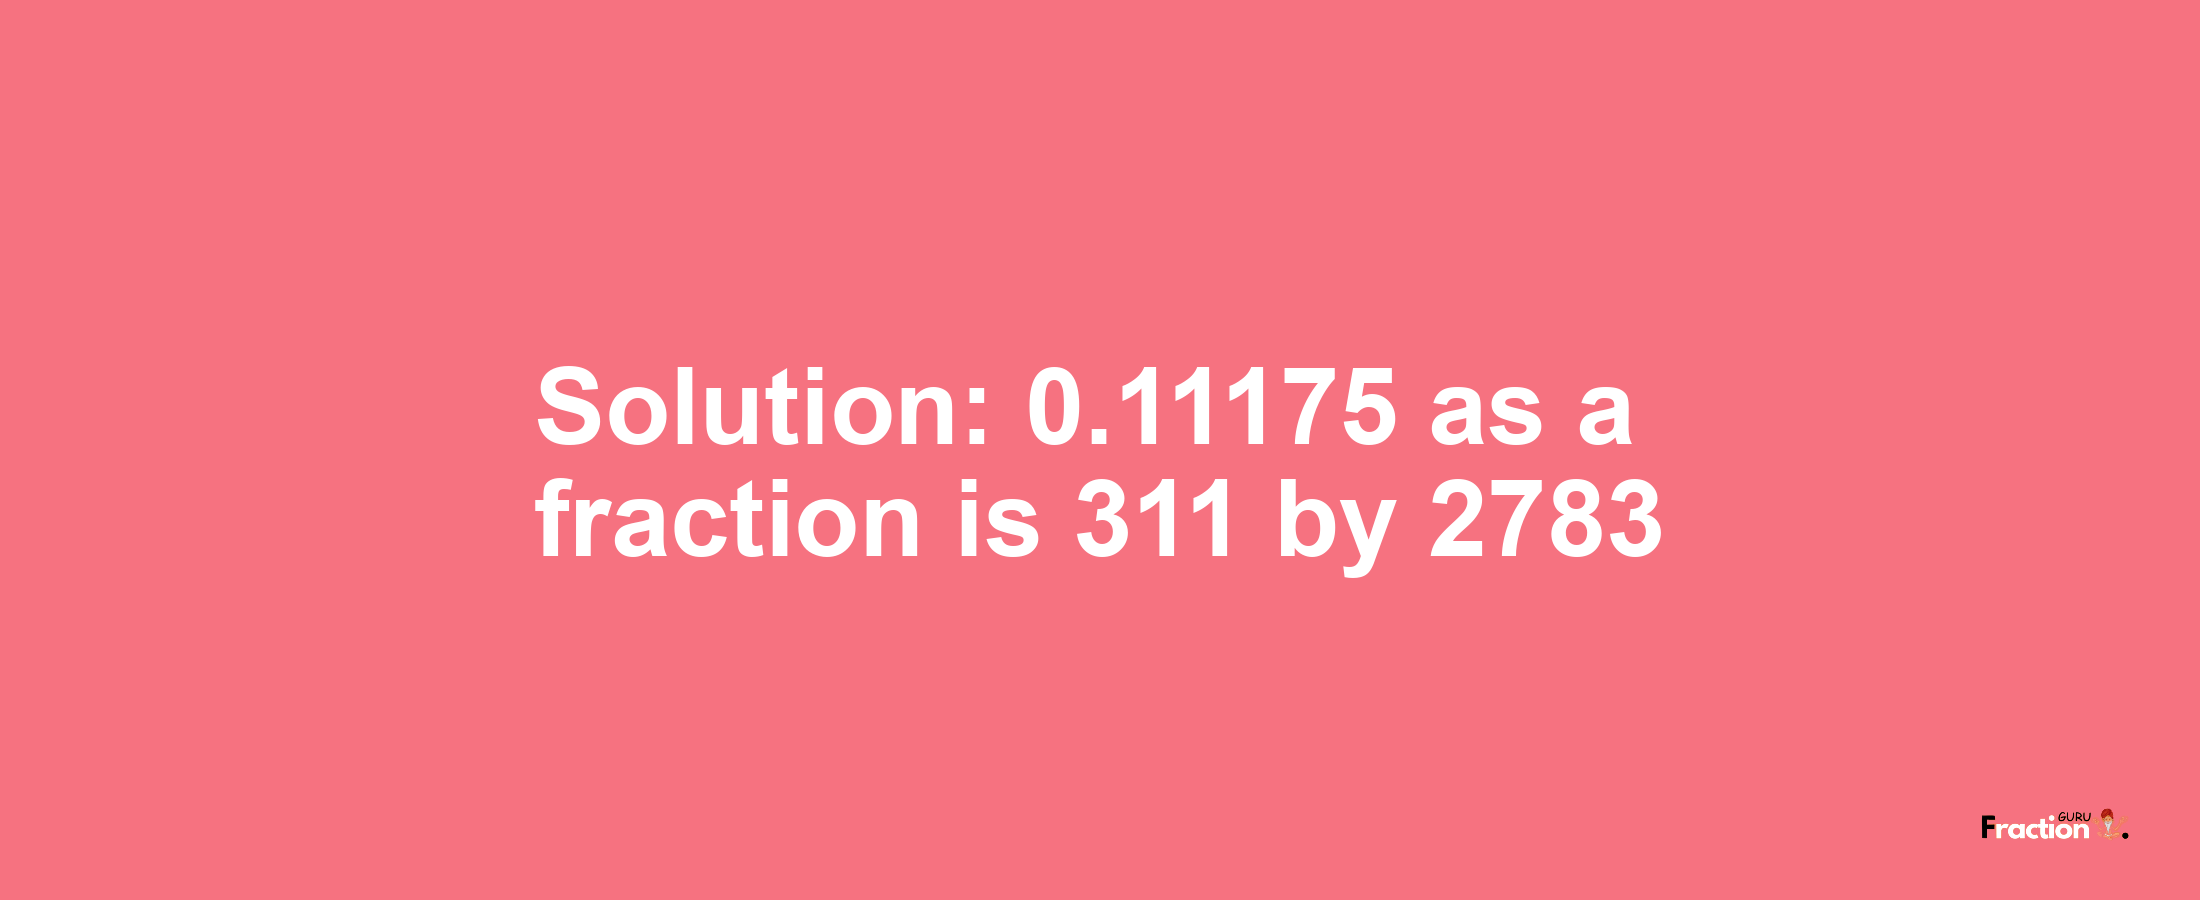 Solution:0.11175 as a fraction is 311/2783